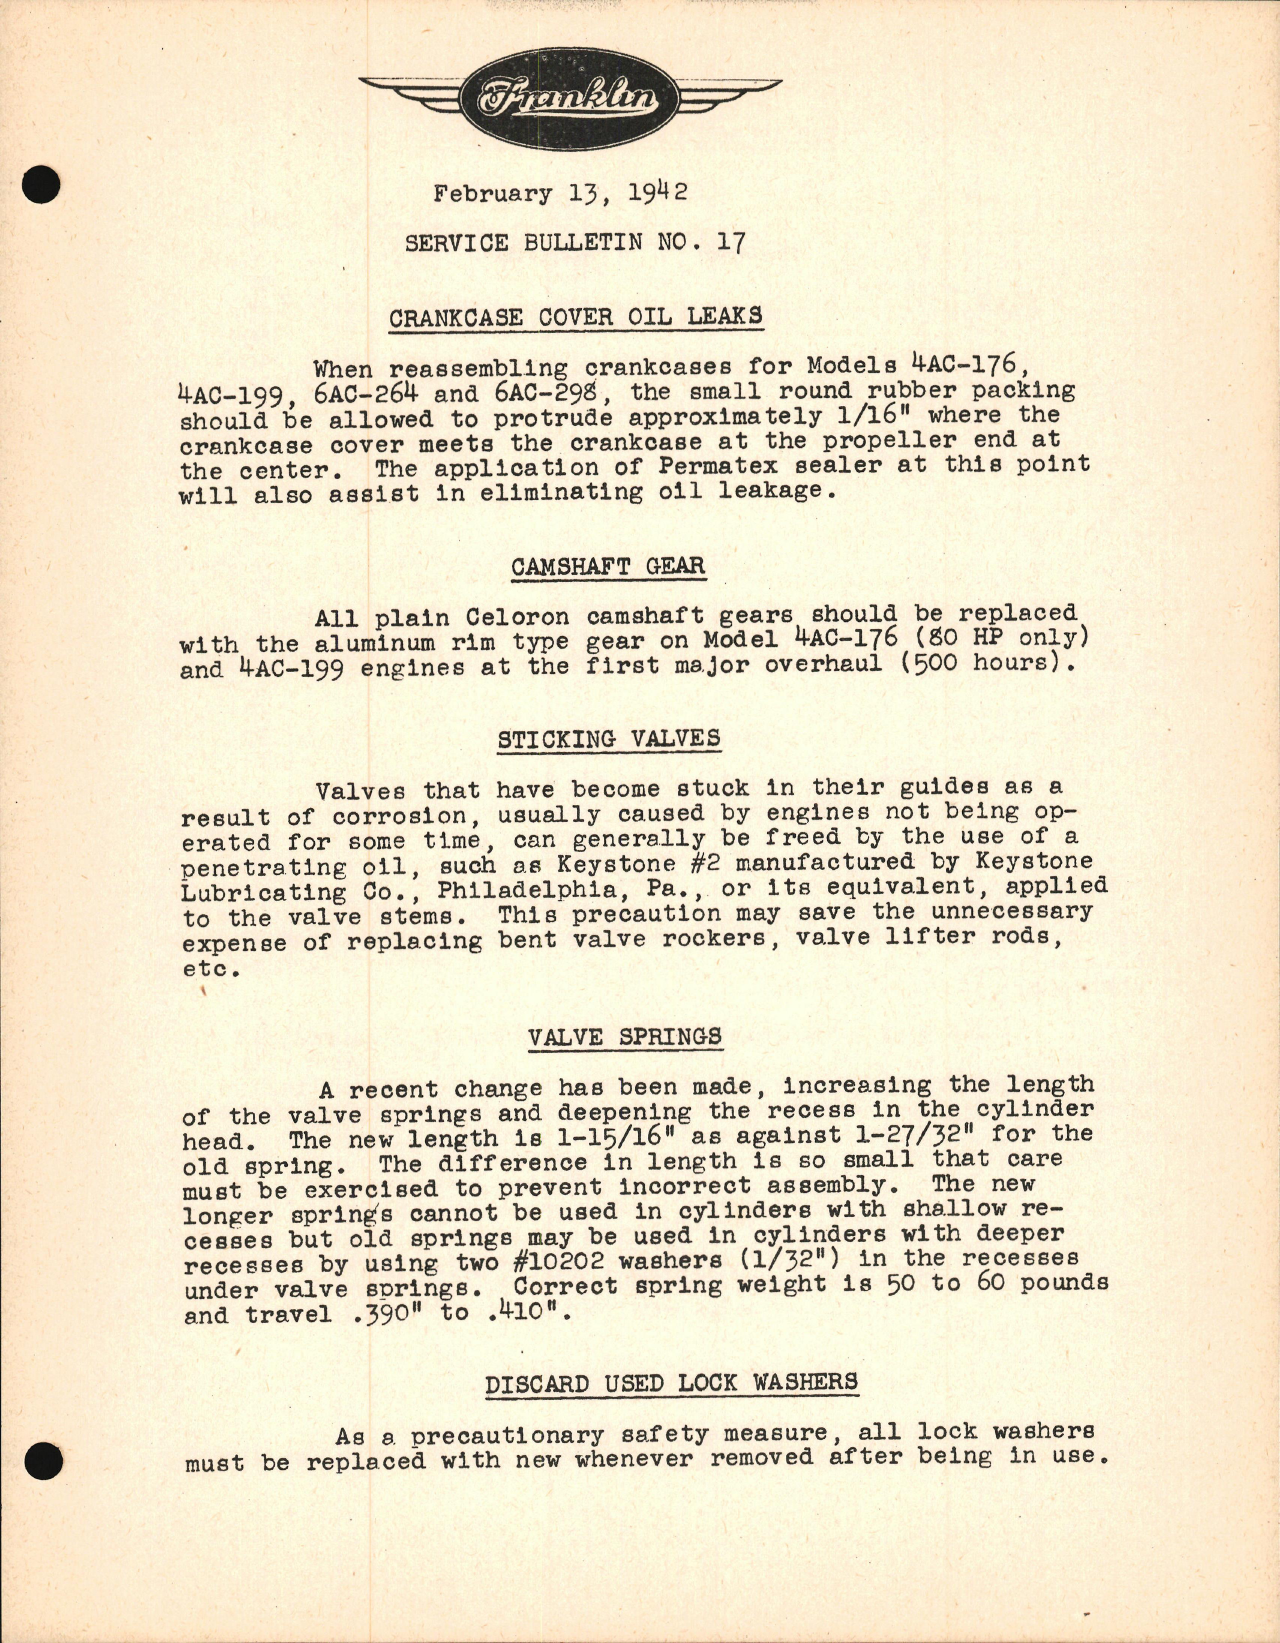 Sample page 1 from AirCorps Library document: Crankcase Cover Oil Leaks